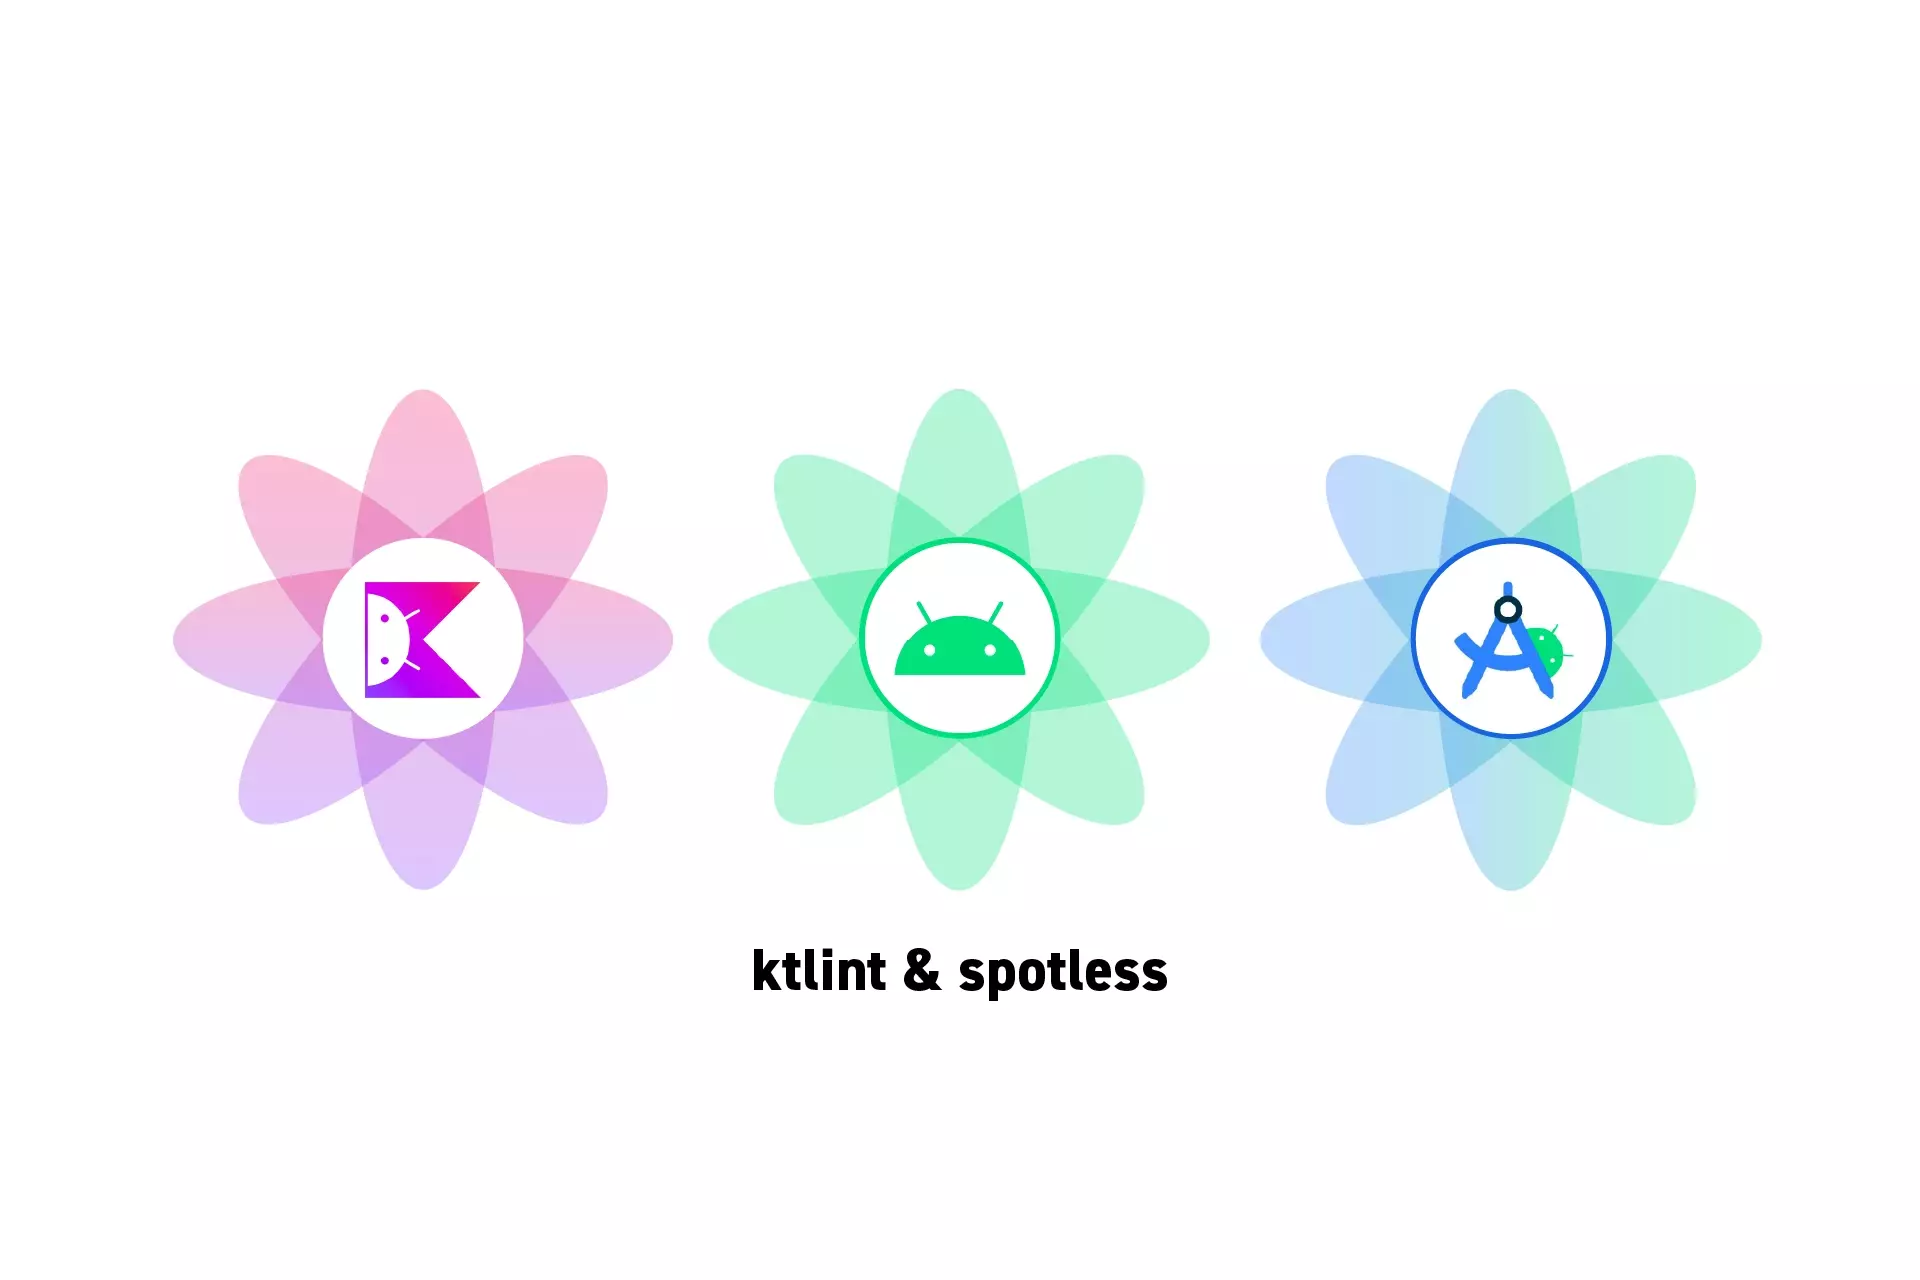 Three flowers that represent Kotlin, Android and Android Studio side by side. Beneath them sits the text “ktlint and spotless.”